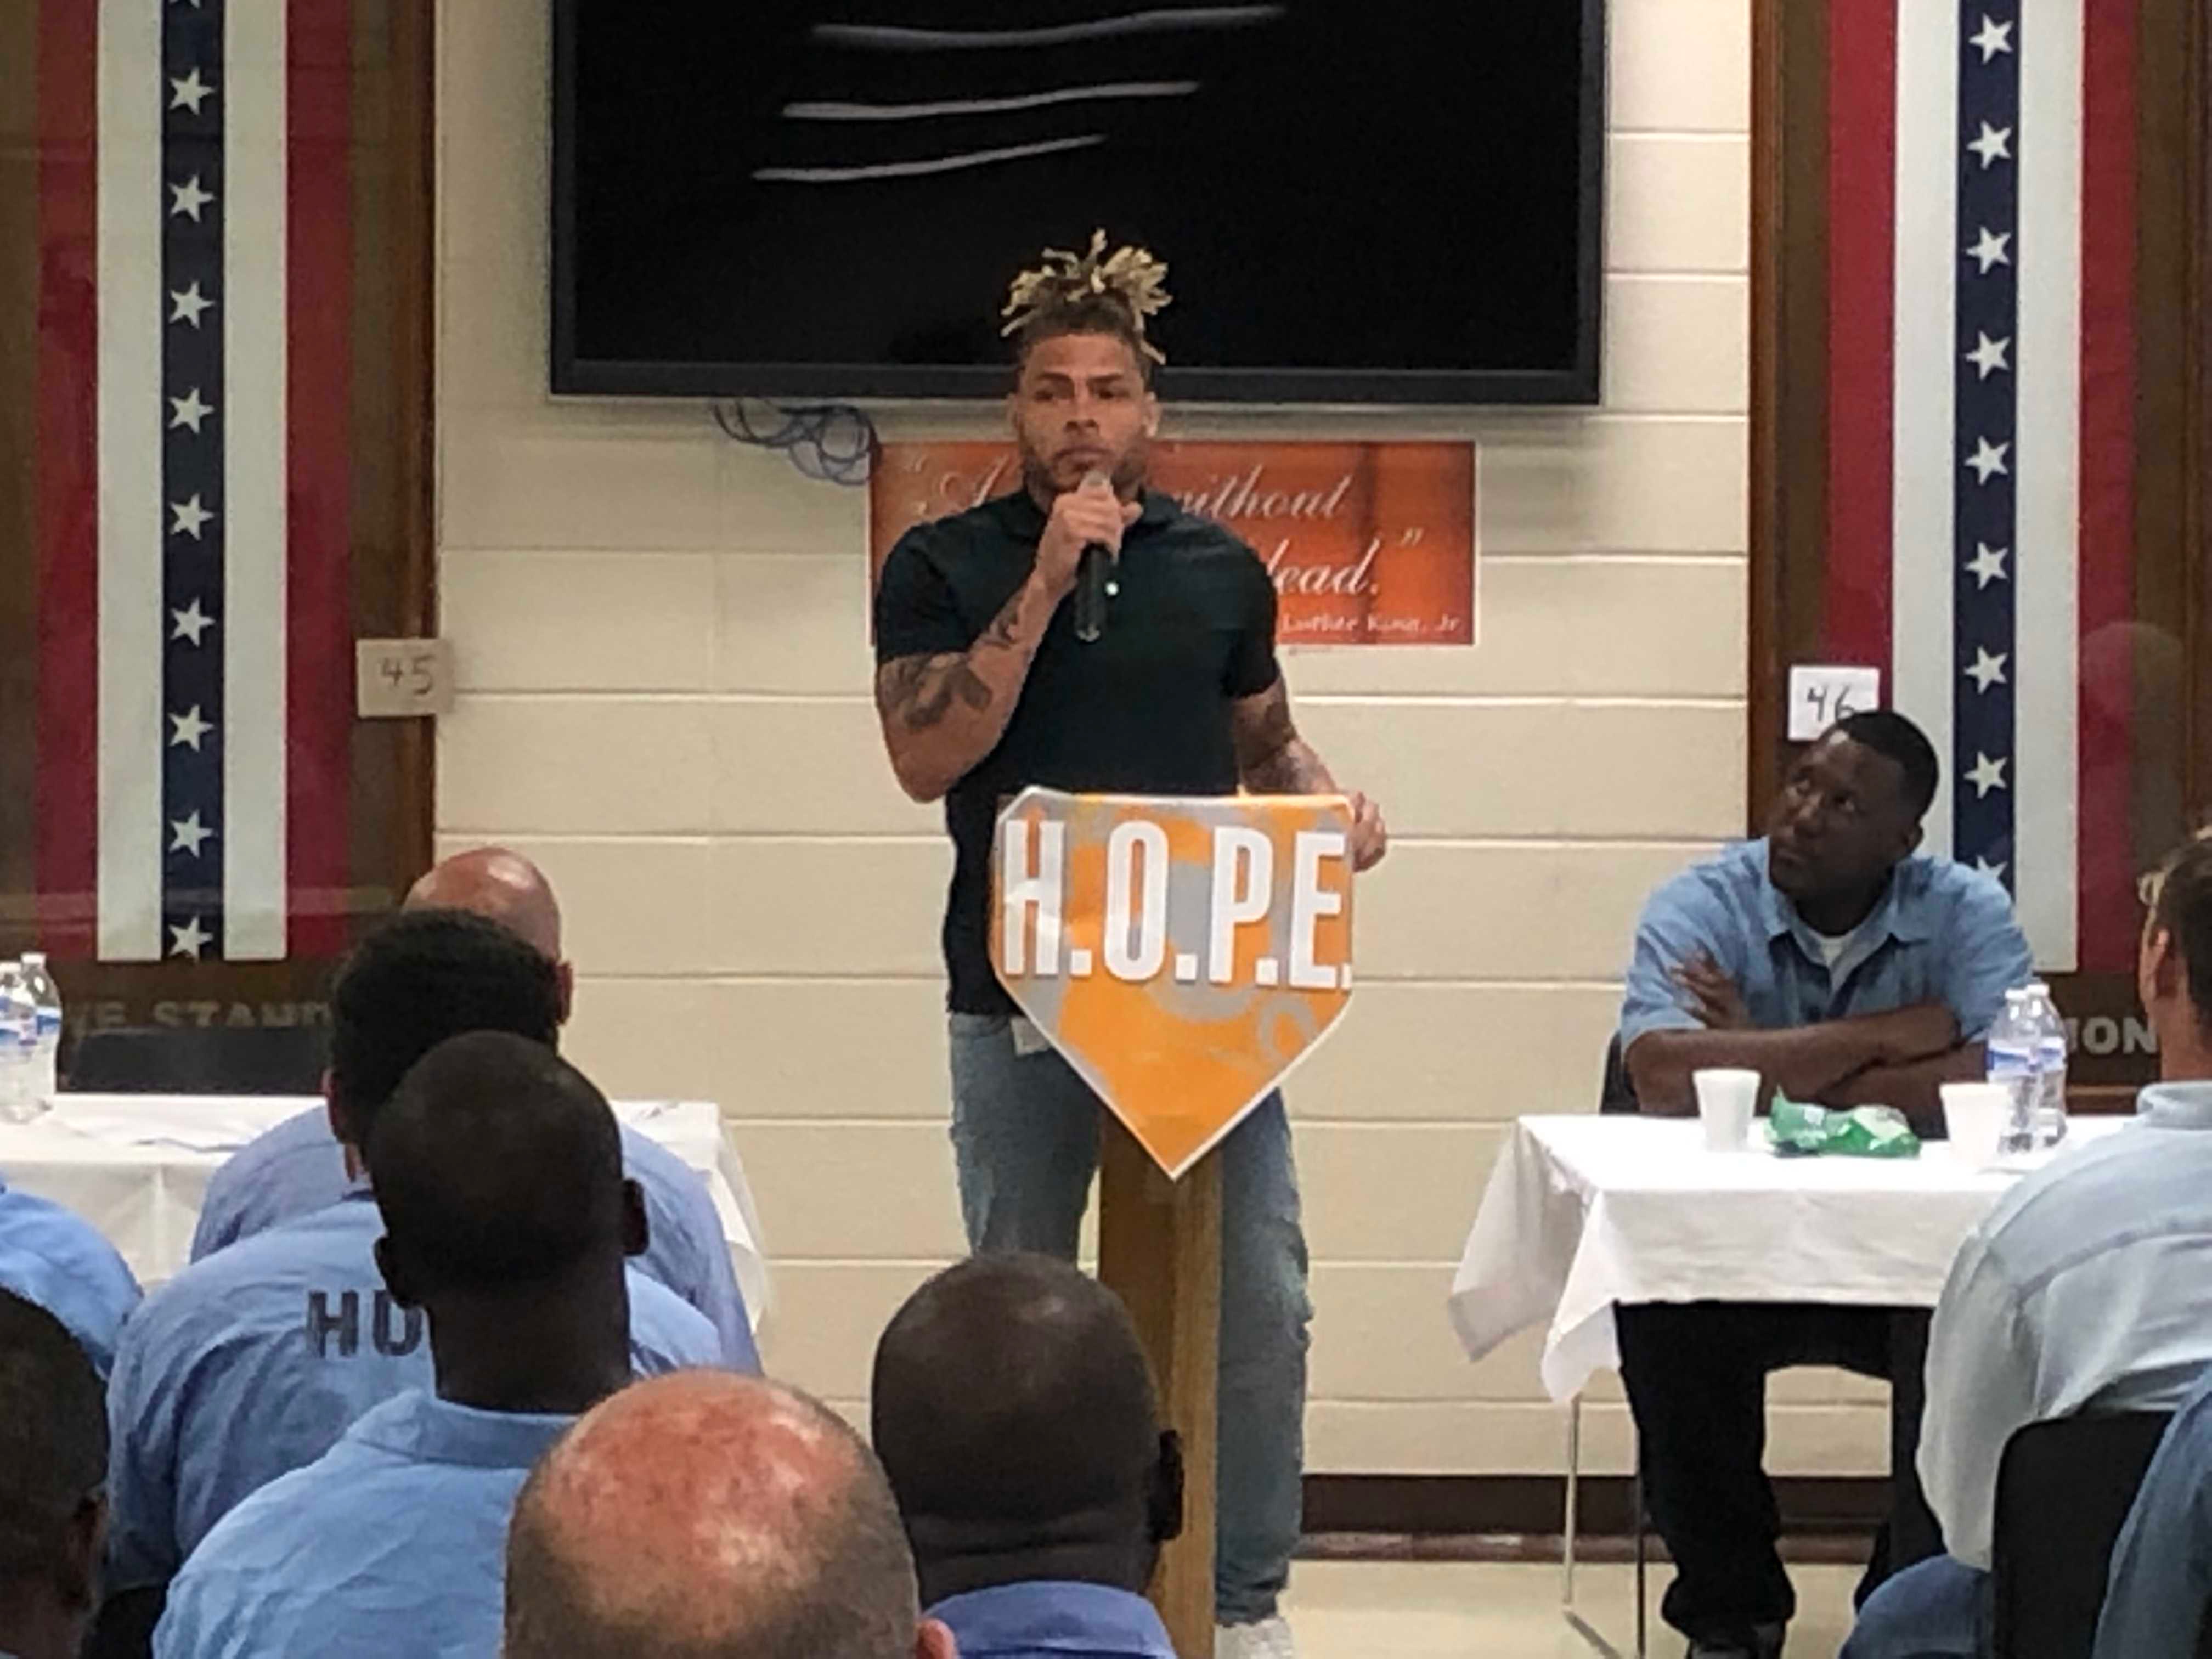 Tyrann Mathieu talks about past, hope with inmates